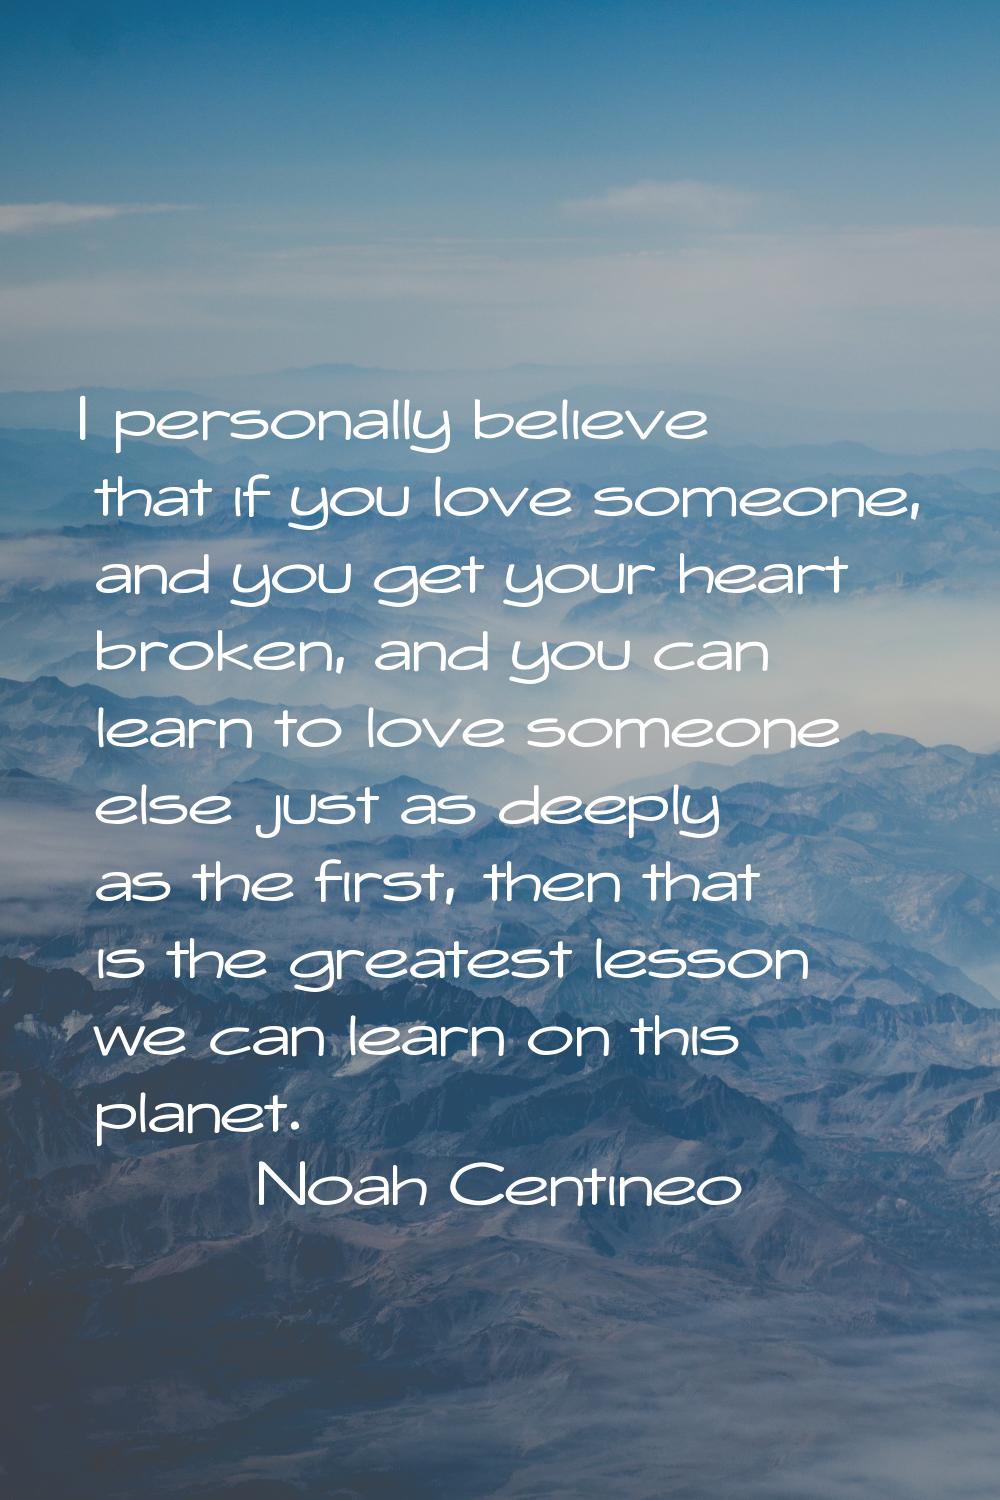 I personally believe that if you love someone, and you get your heart broken, and you can learn to 